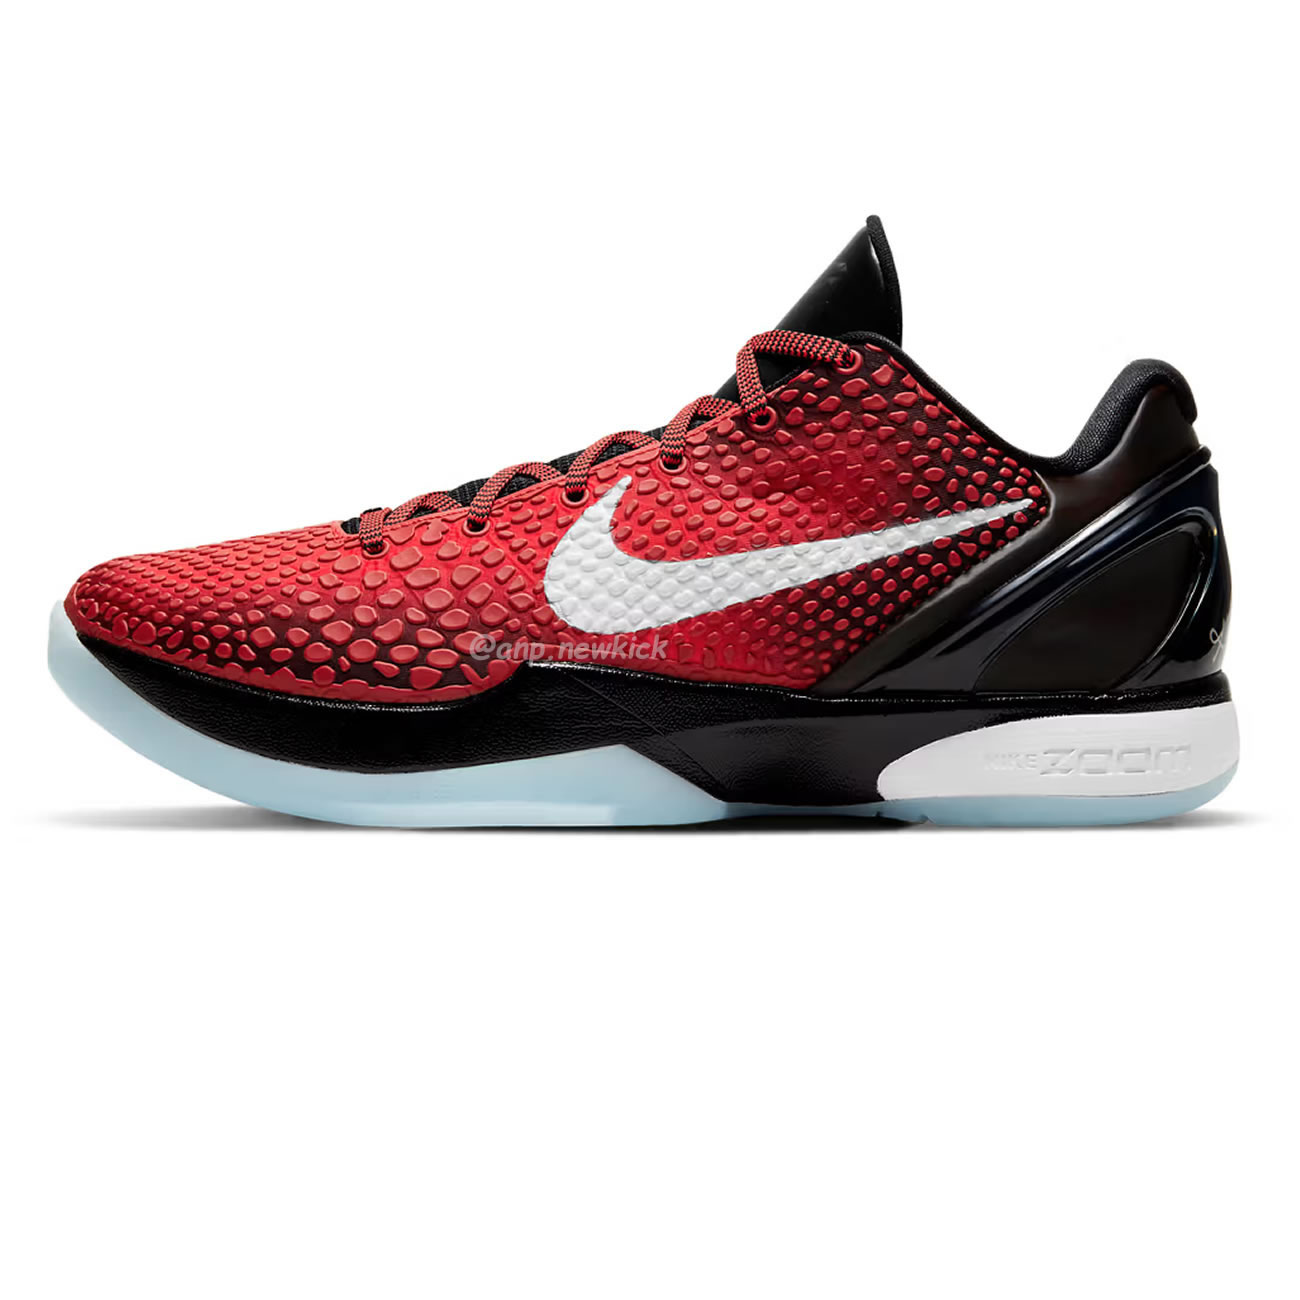 Nike Kobe 6 Protro Challenge Red All-Star (2021) DH9888-600